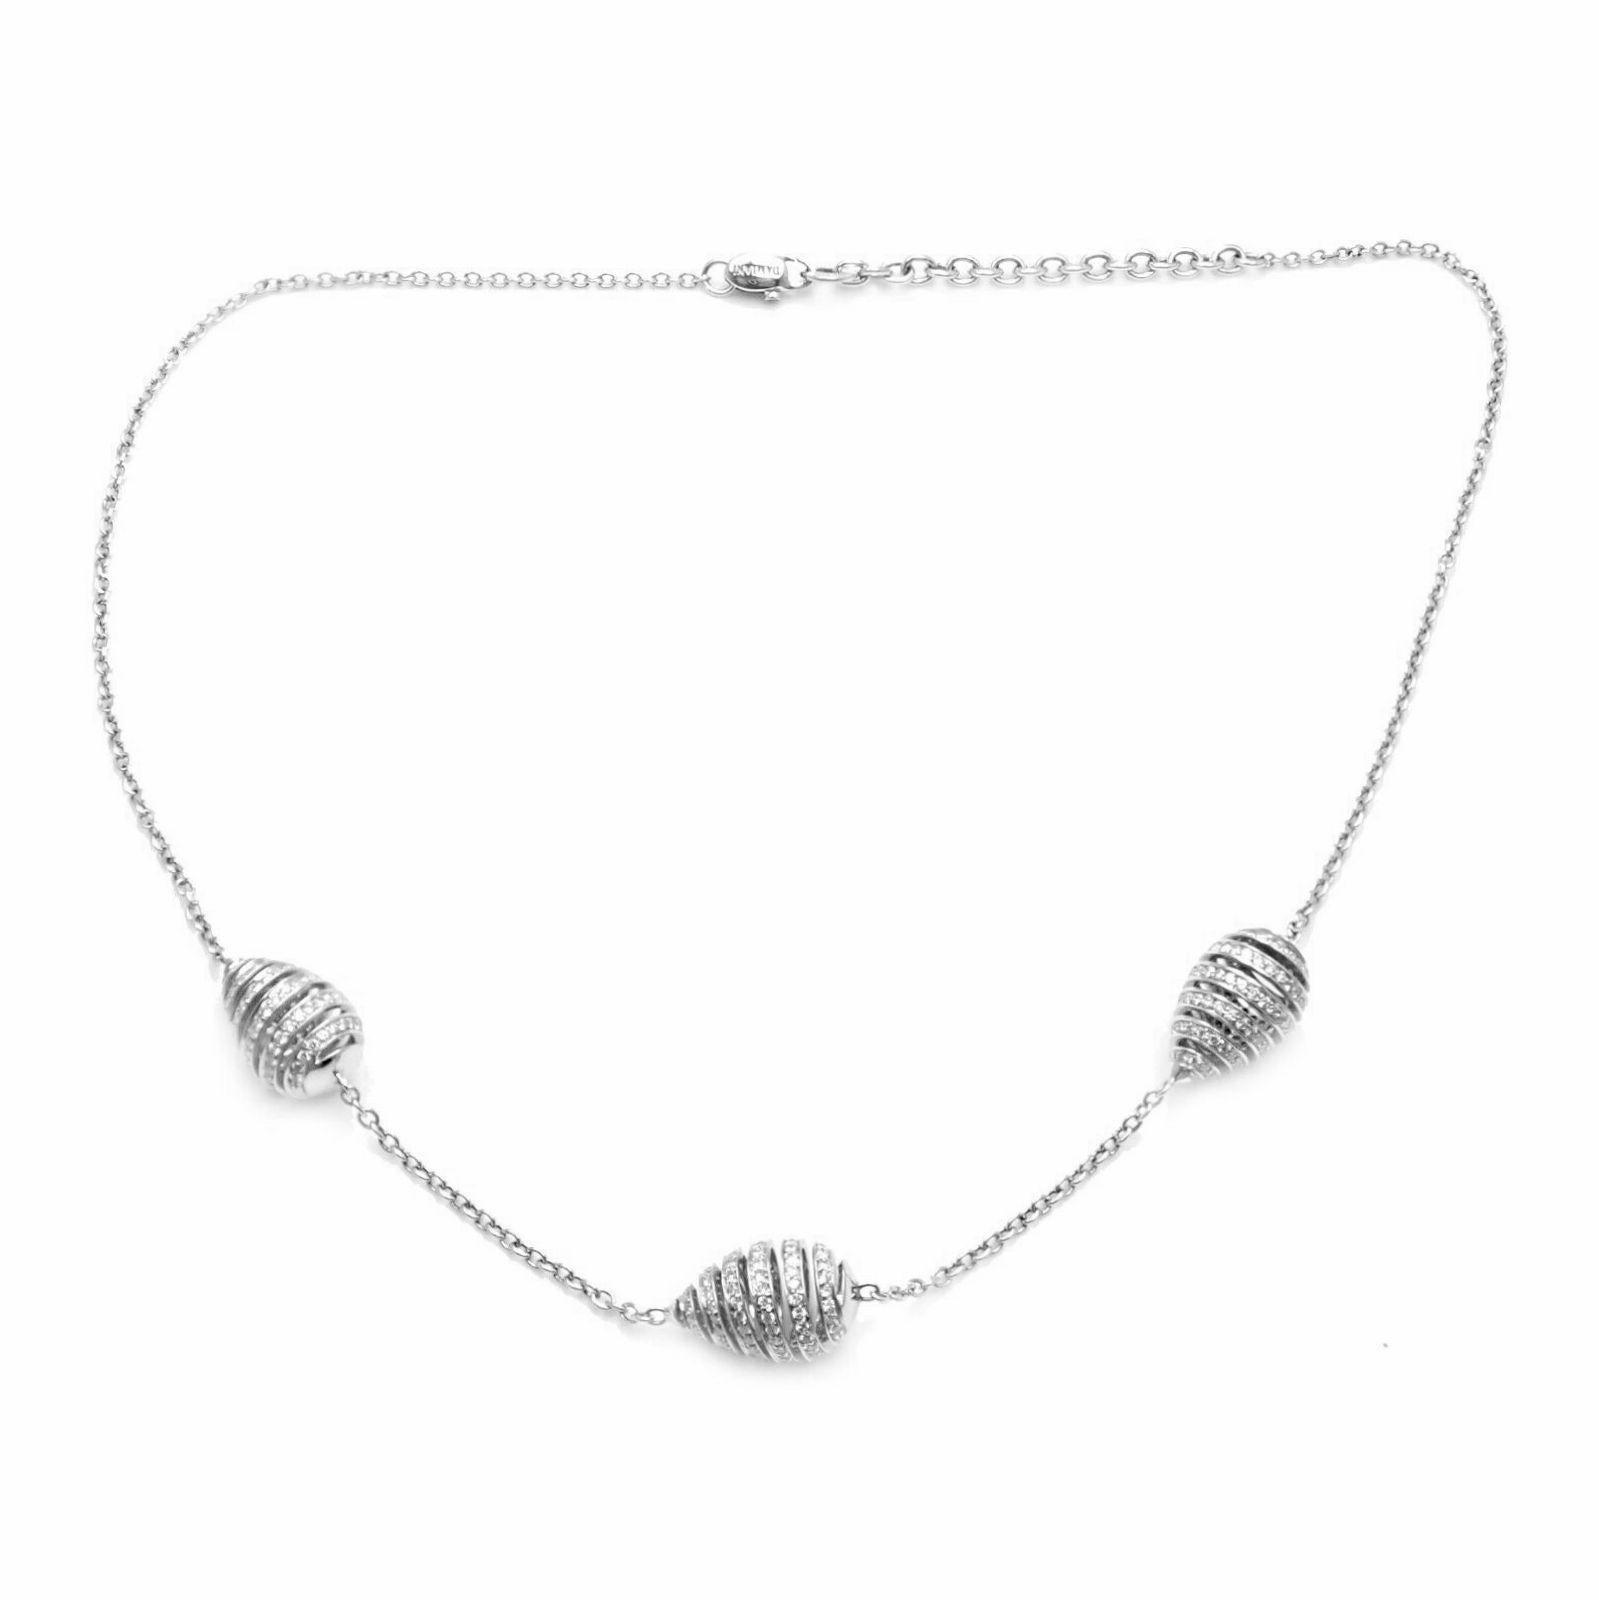 18k White Gold Diamond Spiral Teardrop 3 Motif Necklace by Damiani.
With 345 round brilliant cut diamonds VS2 Clarity and G Color total weight approximately 6.00ct
This necklace comes with Box, Certificate.
Details:
Measurements:
Length: